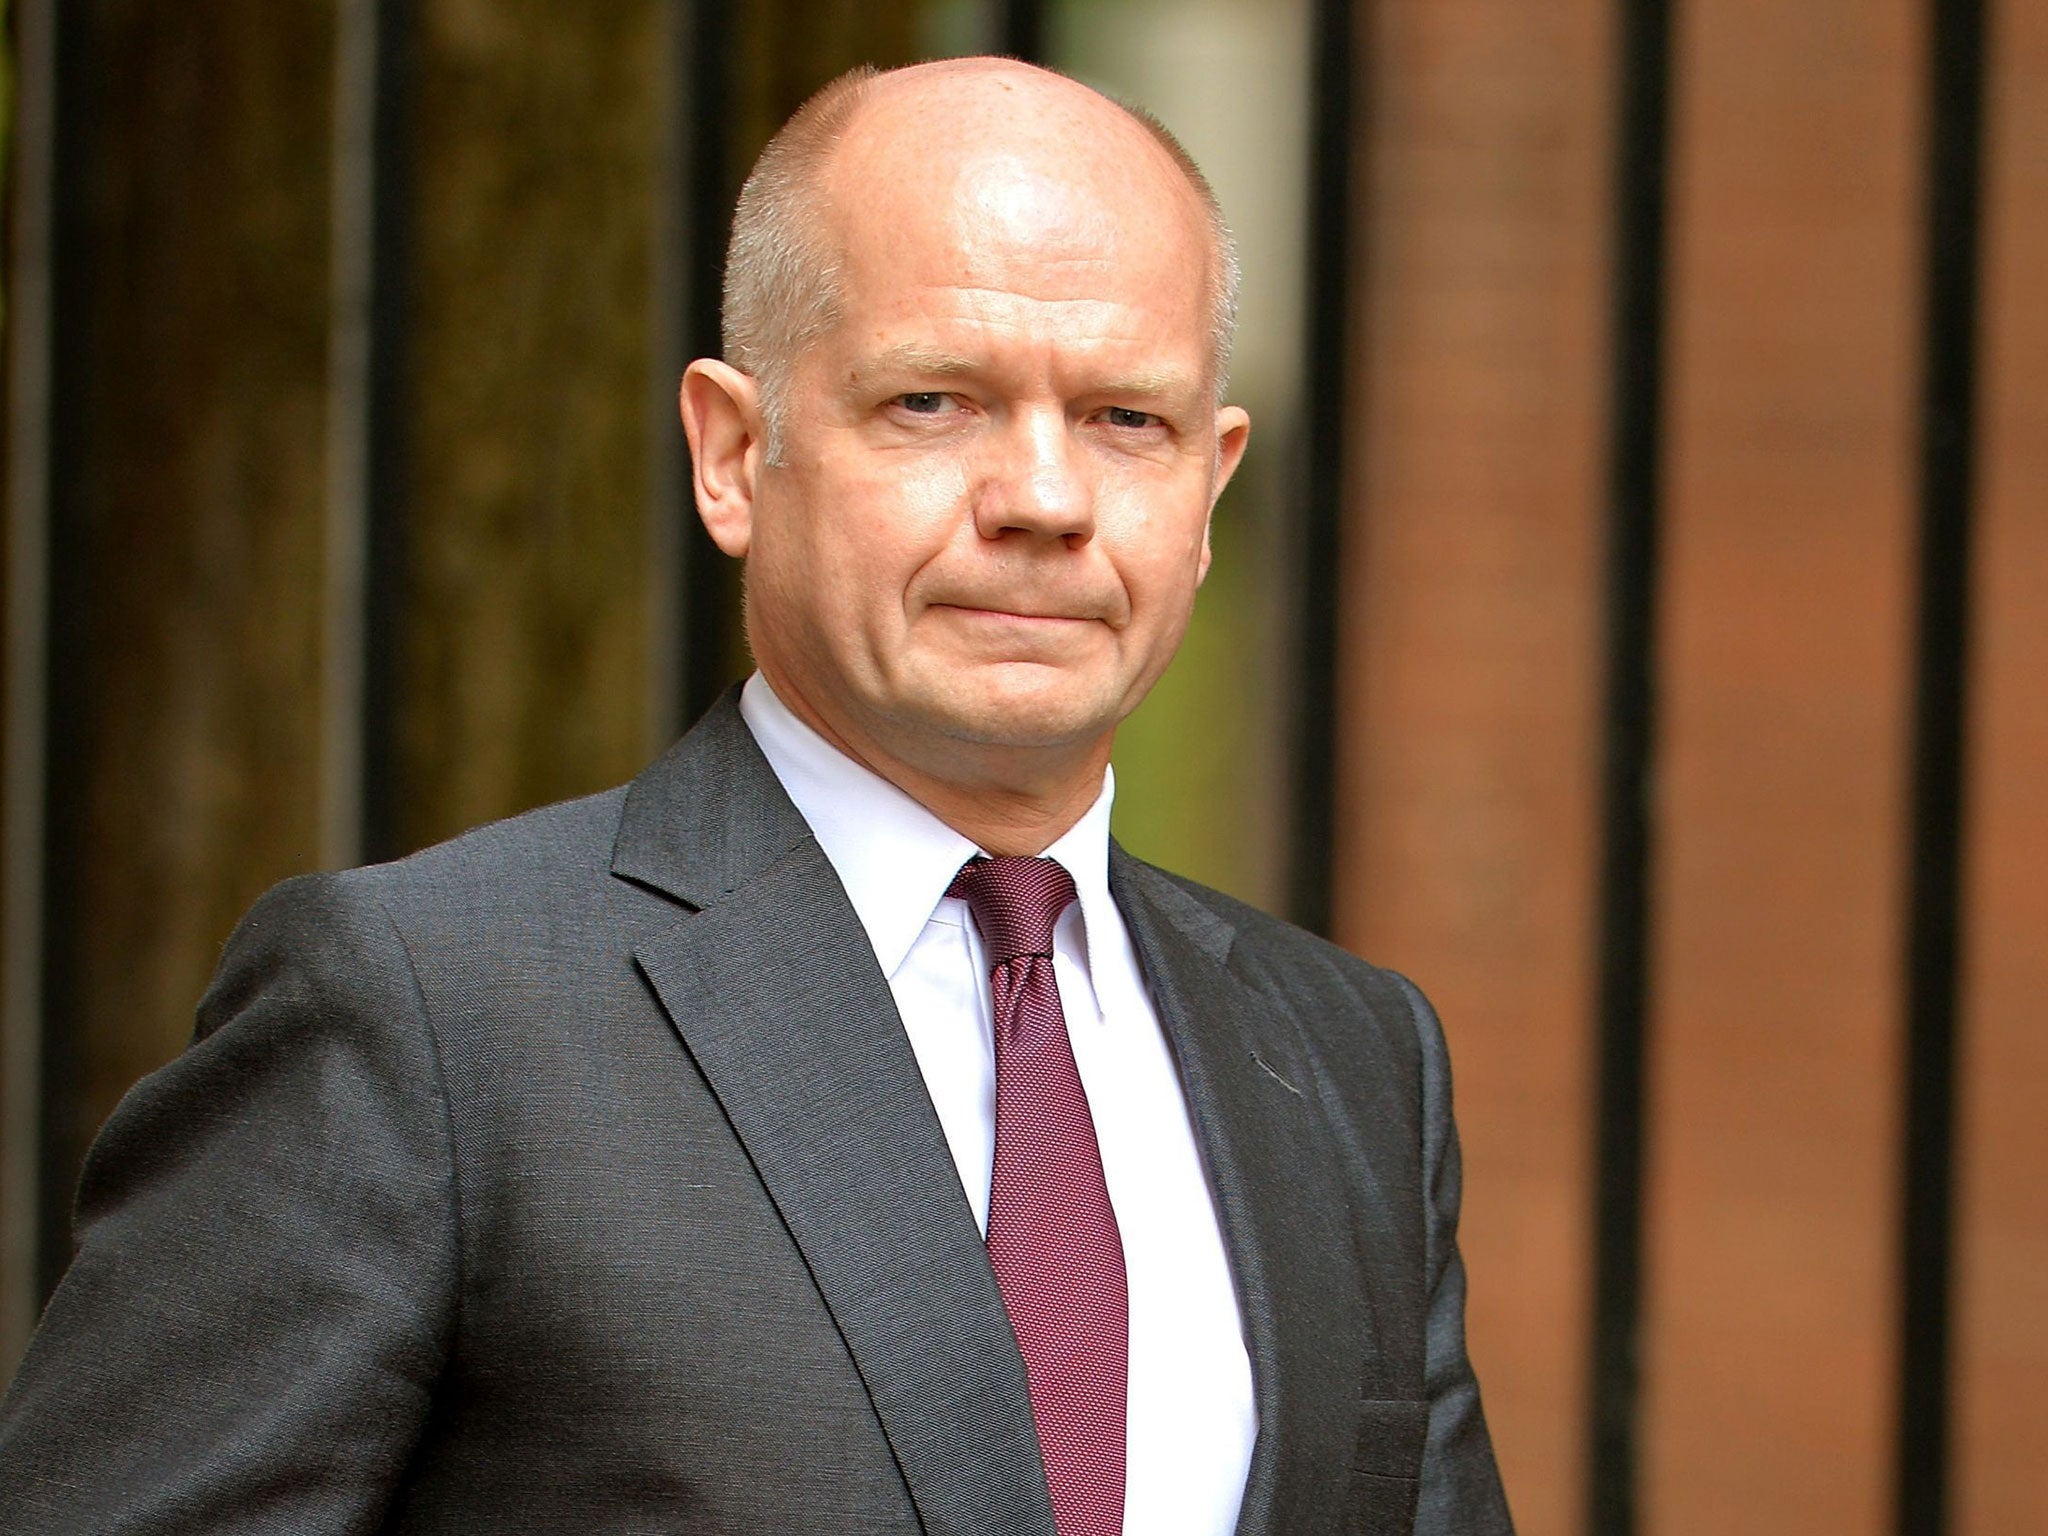 “I fought a long campaign to stop the Foreign Office from putting the word ‘ongoing’ in any document, or calling anything a strategy that was not a strategy,” Hague said.